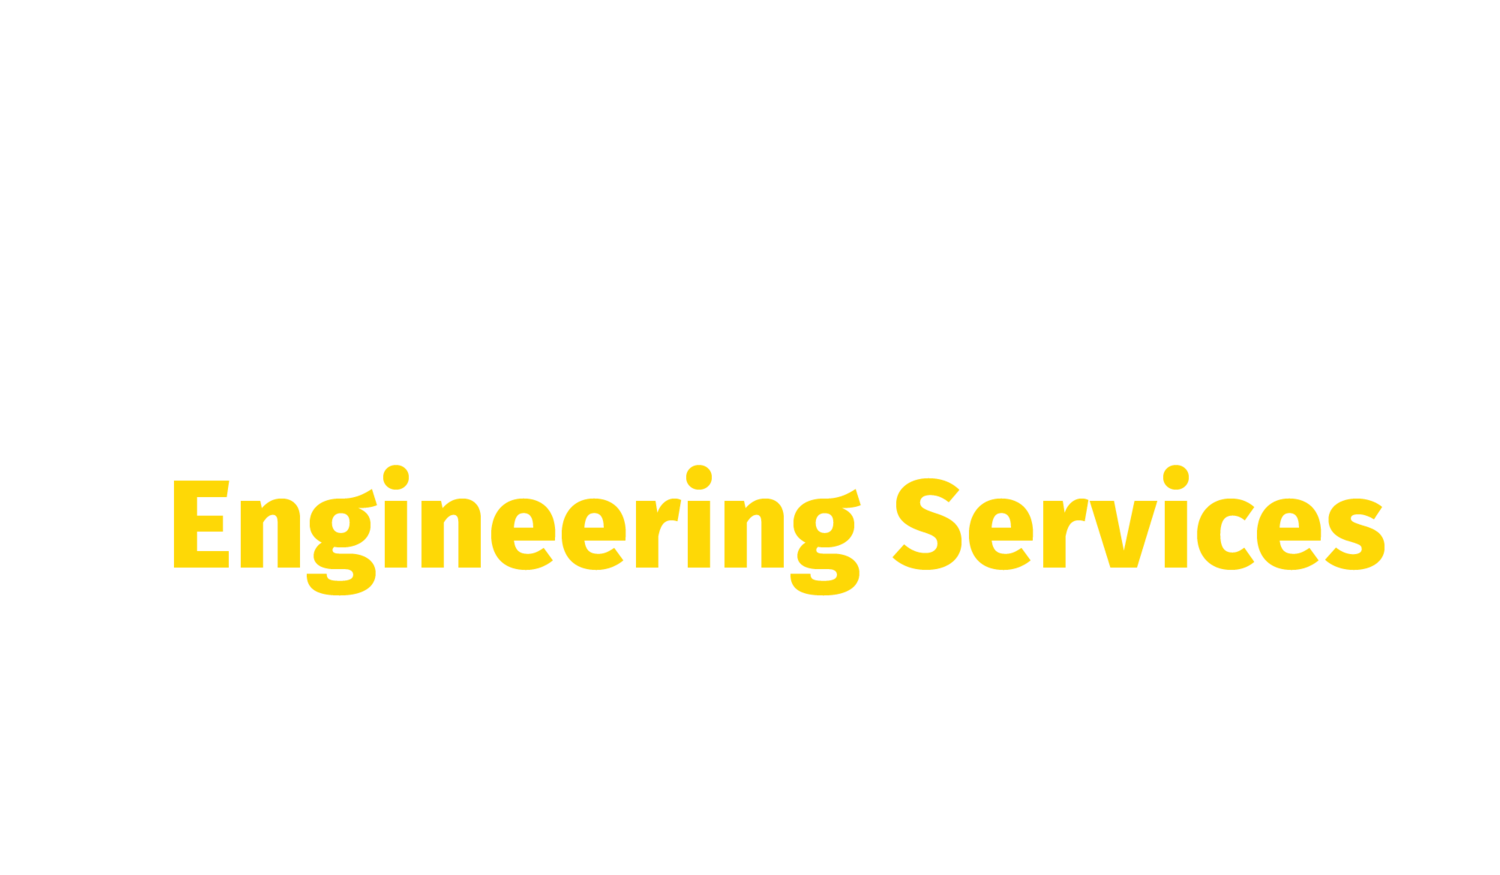 OMS117